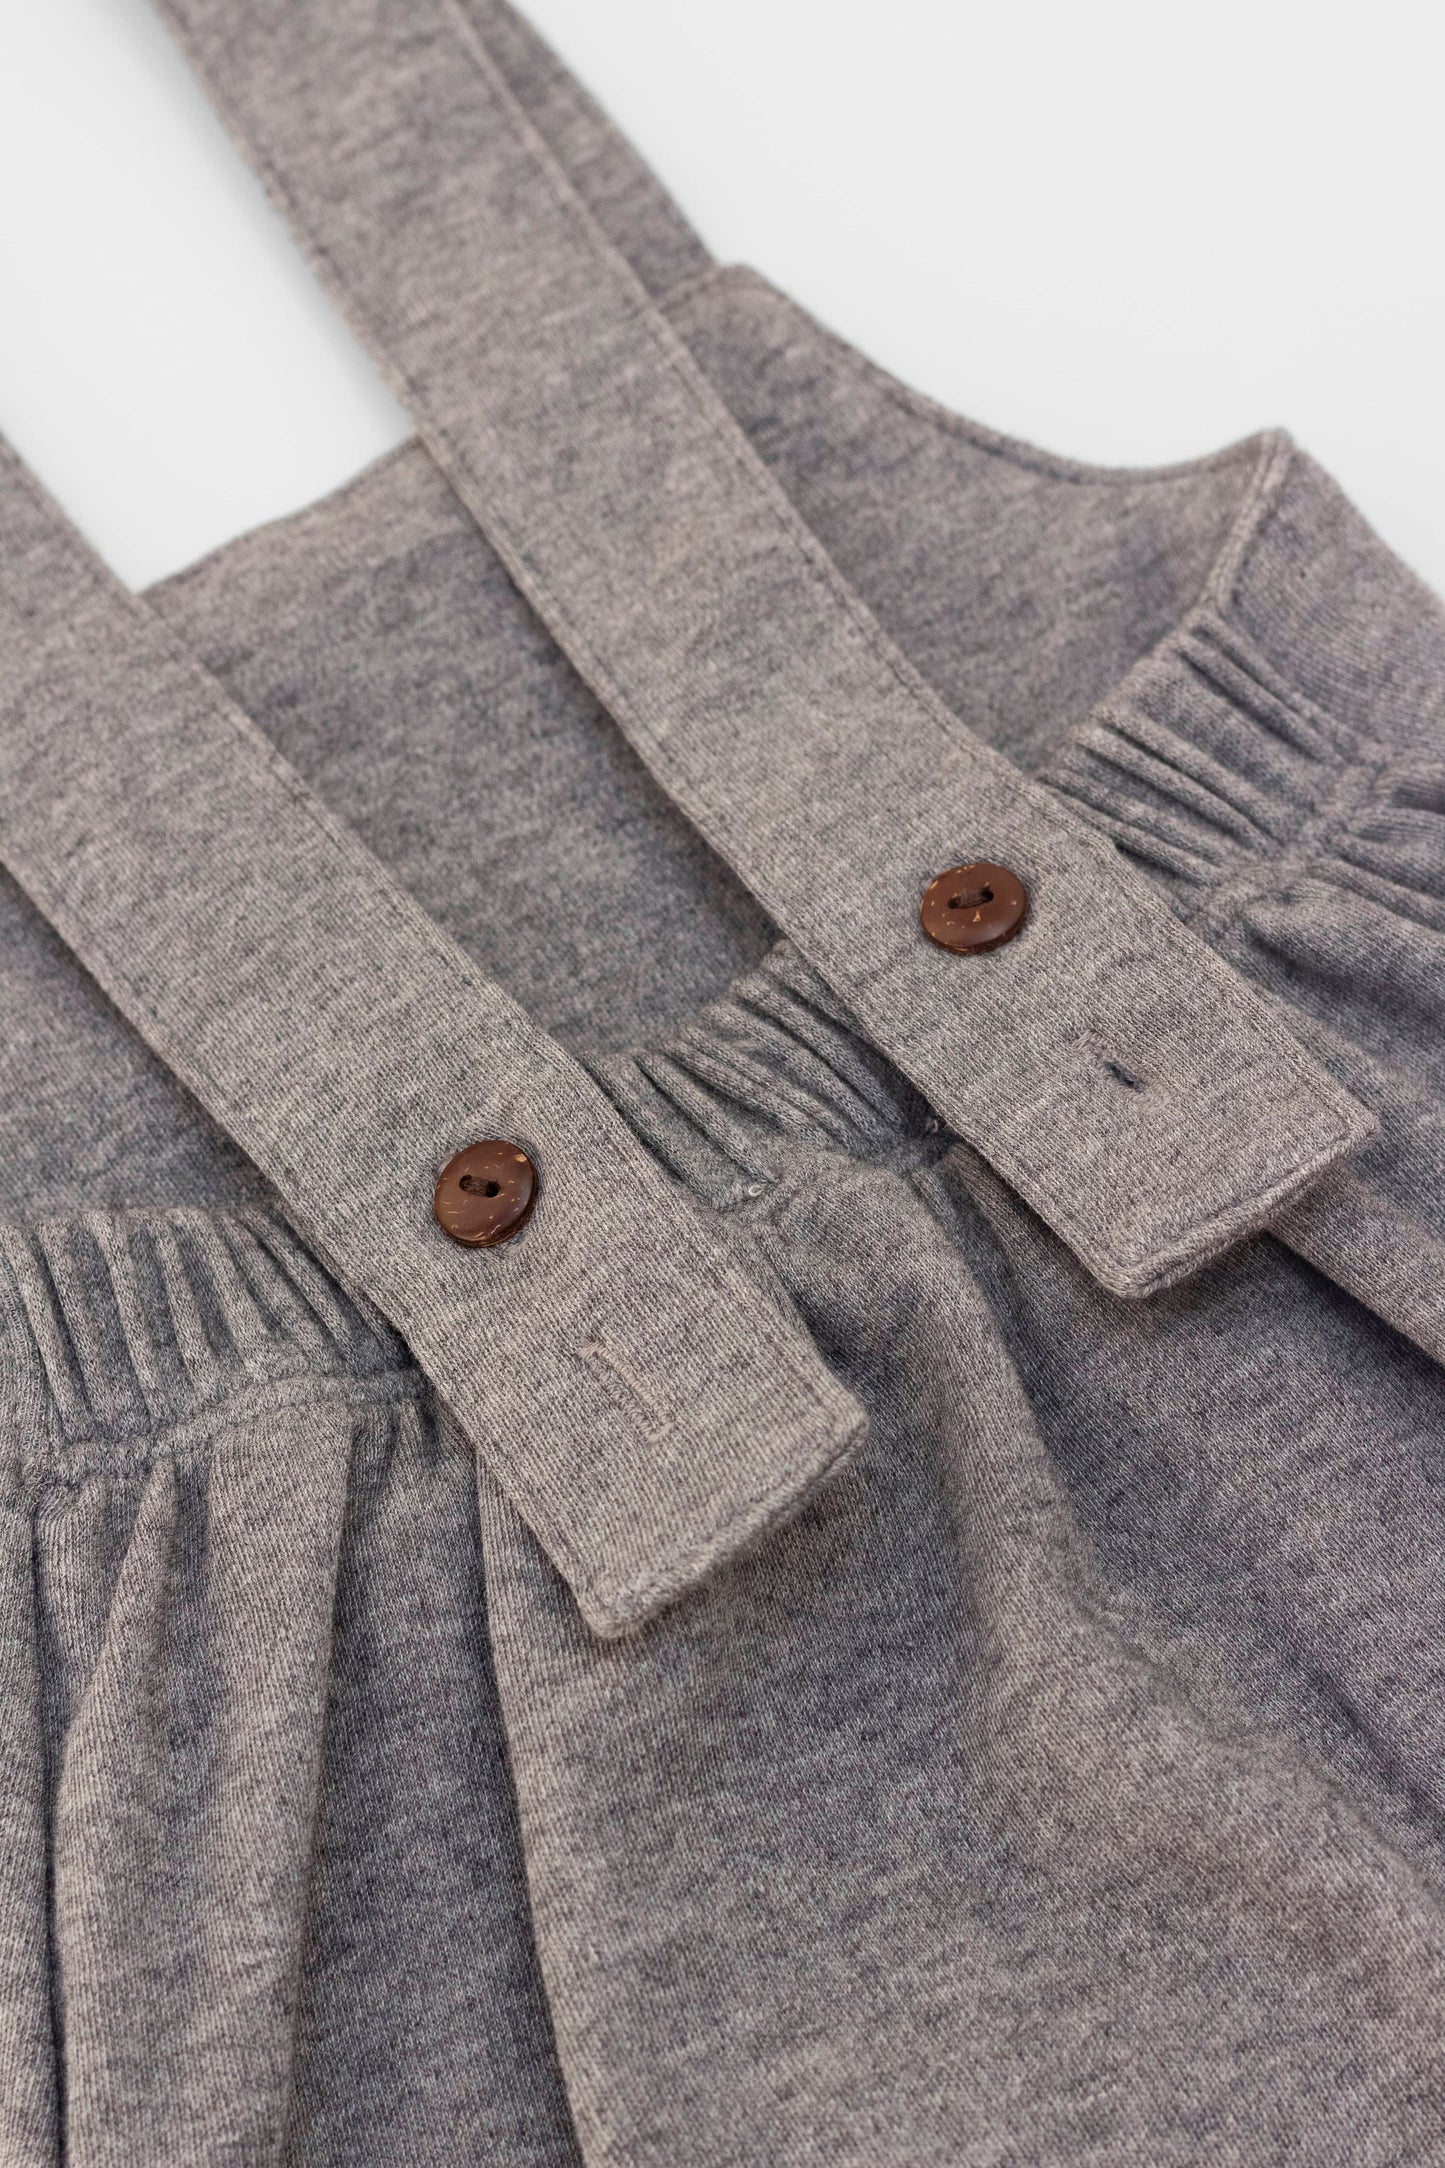 Organic-cotton overall with wooden buttons.